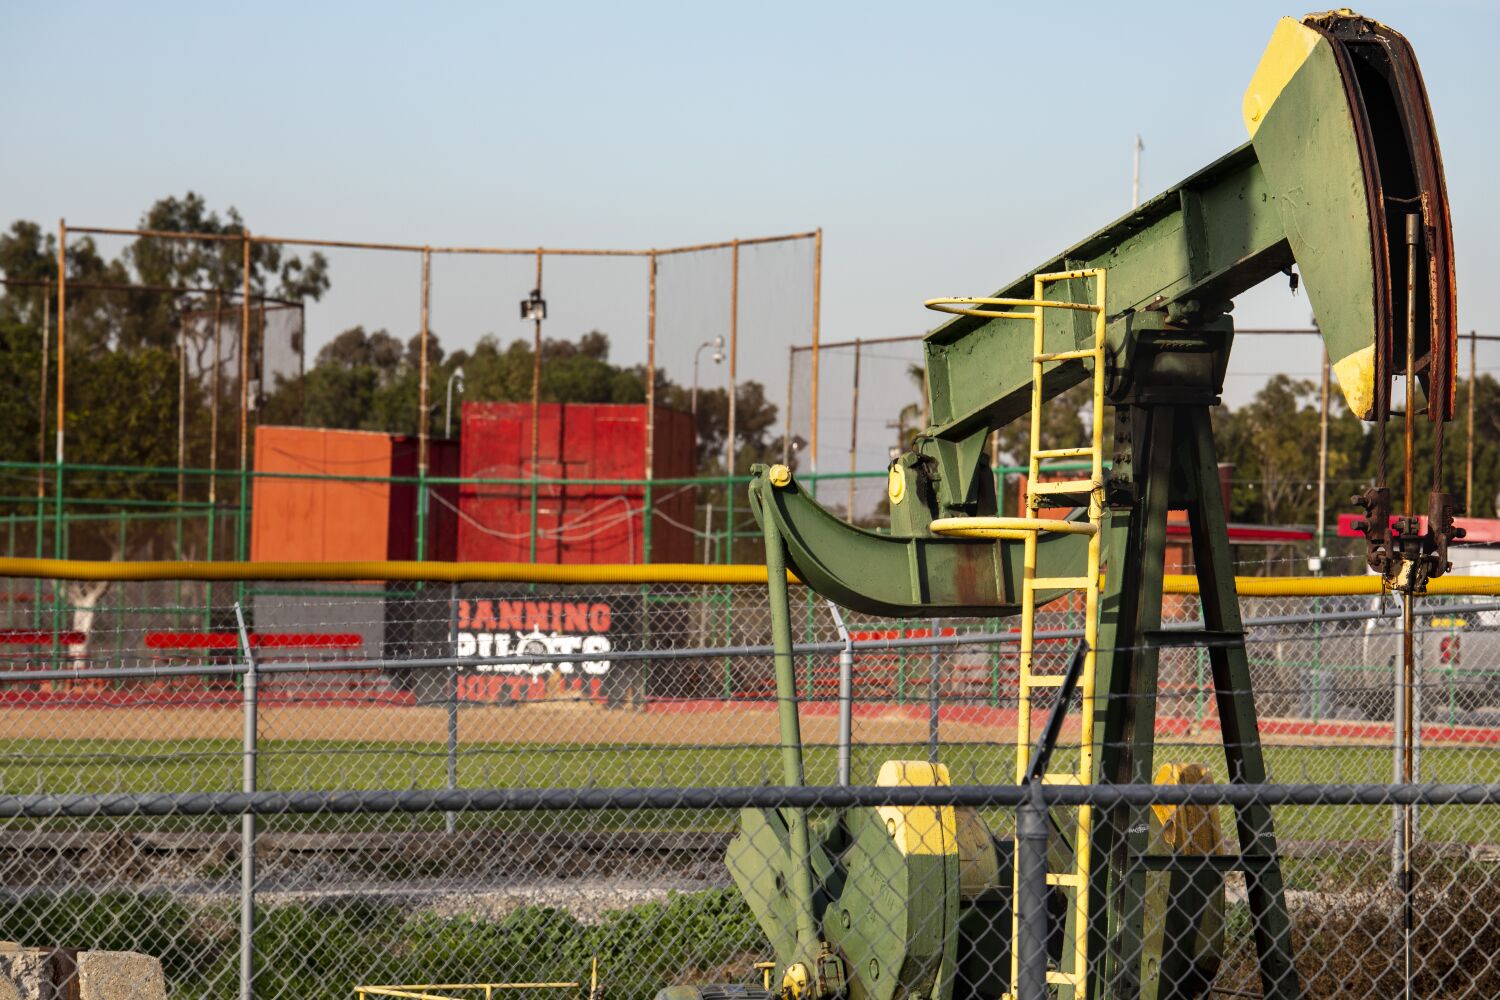 In historic move, Los Angeles bans new oil wells, phases out existing ones